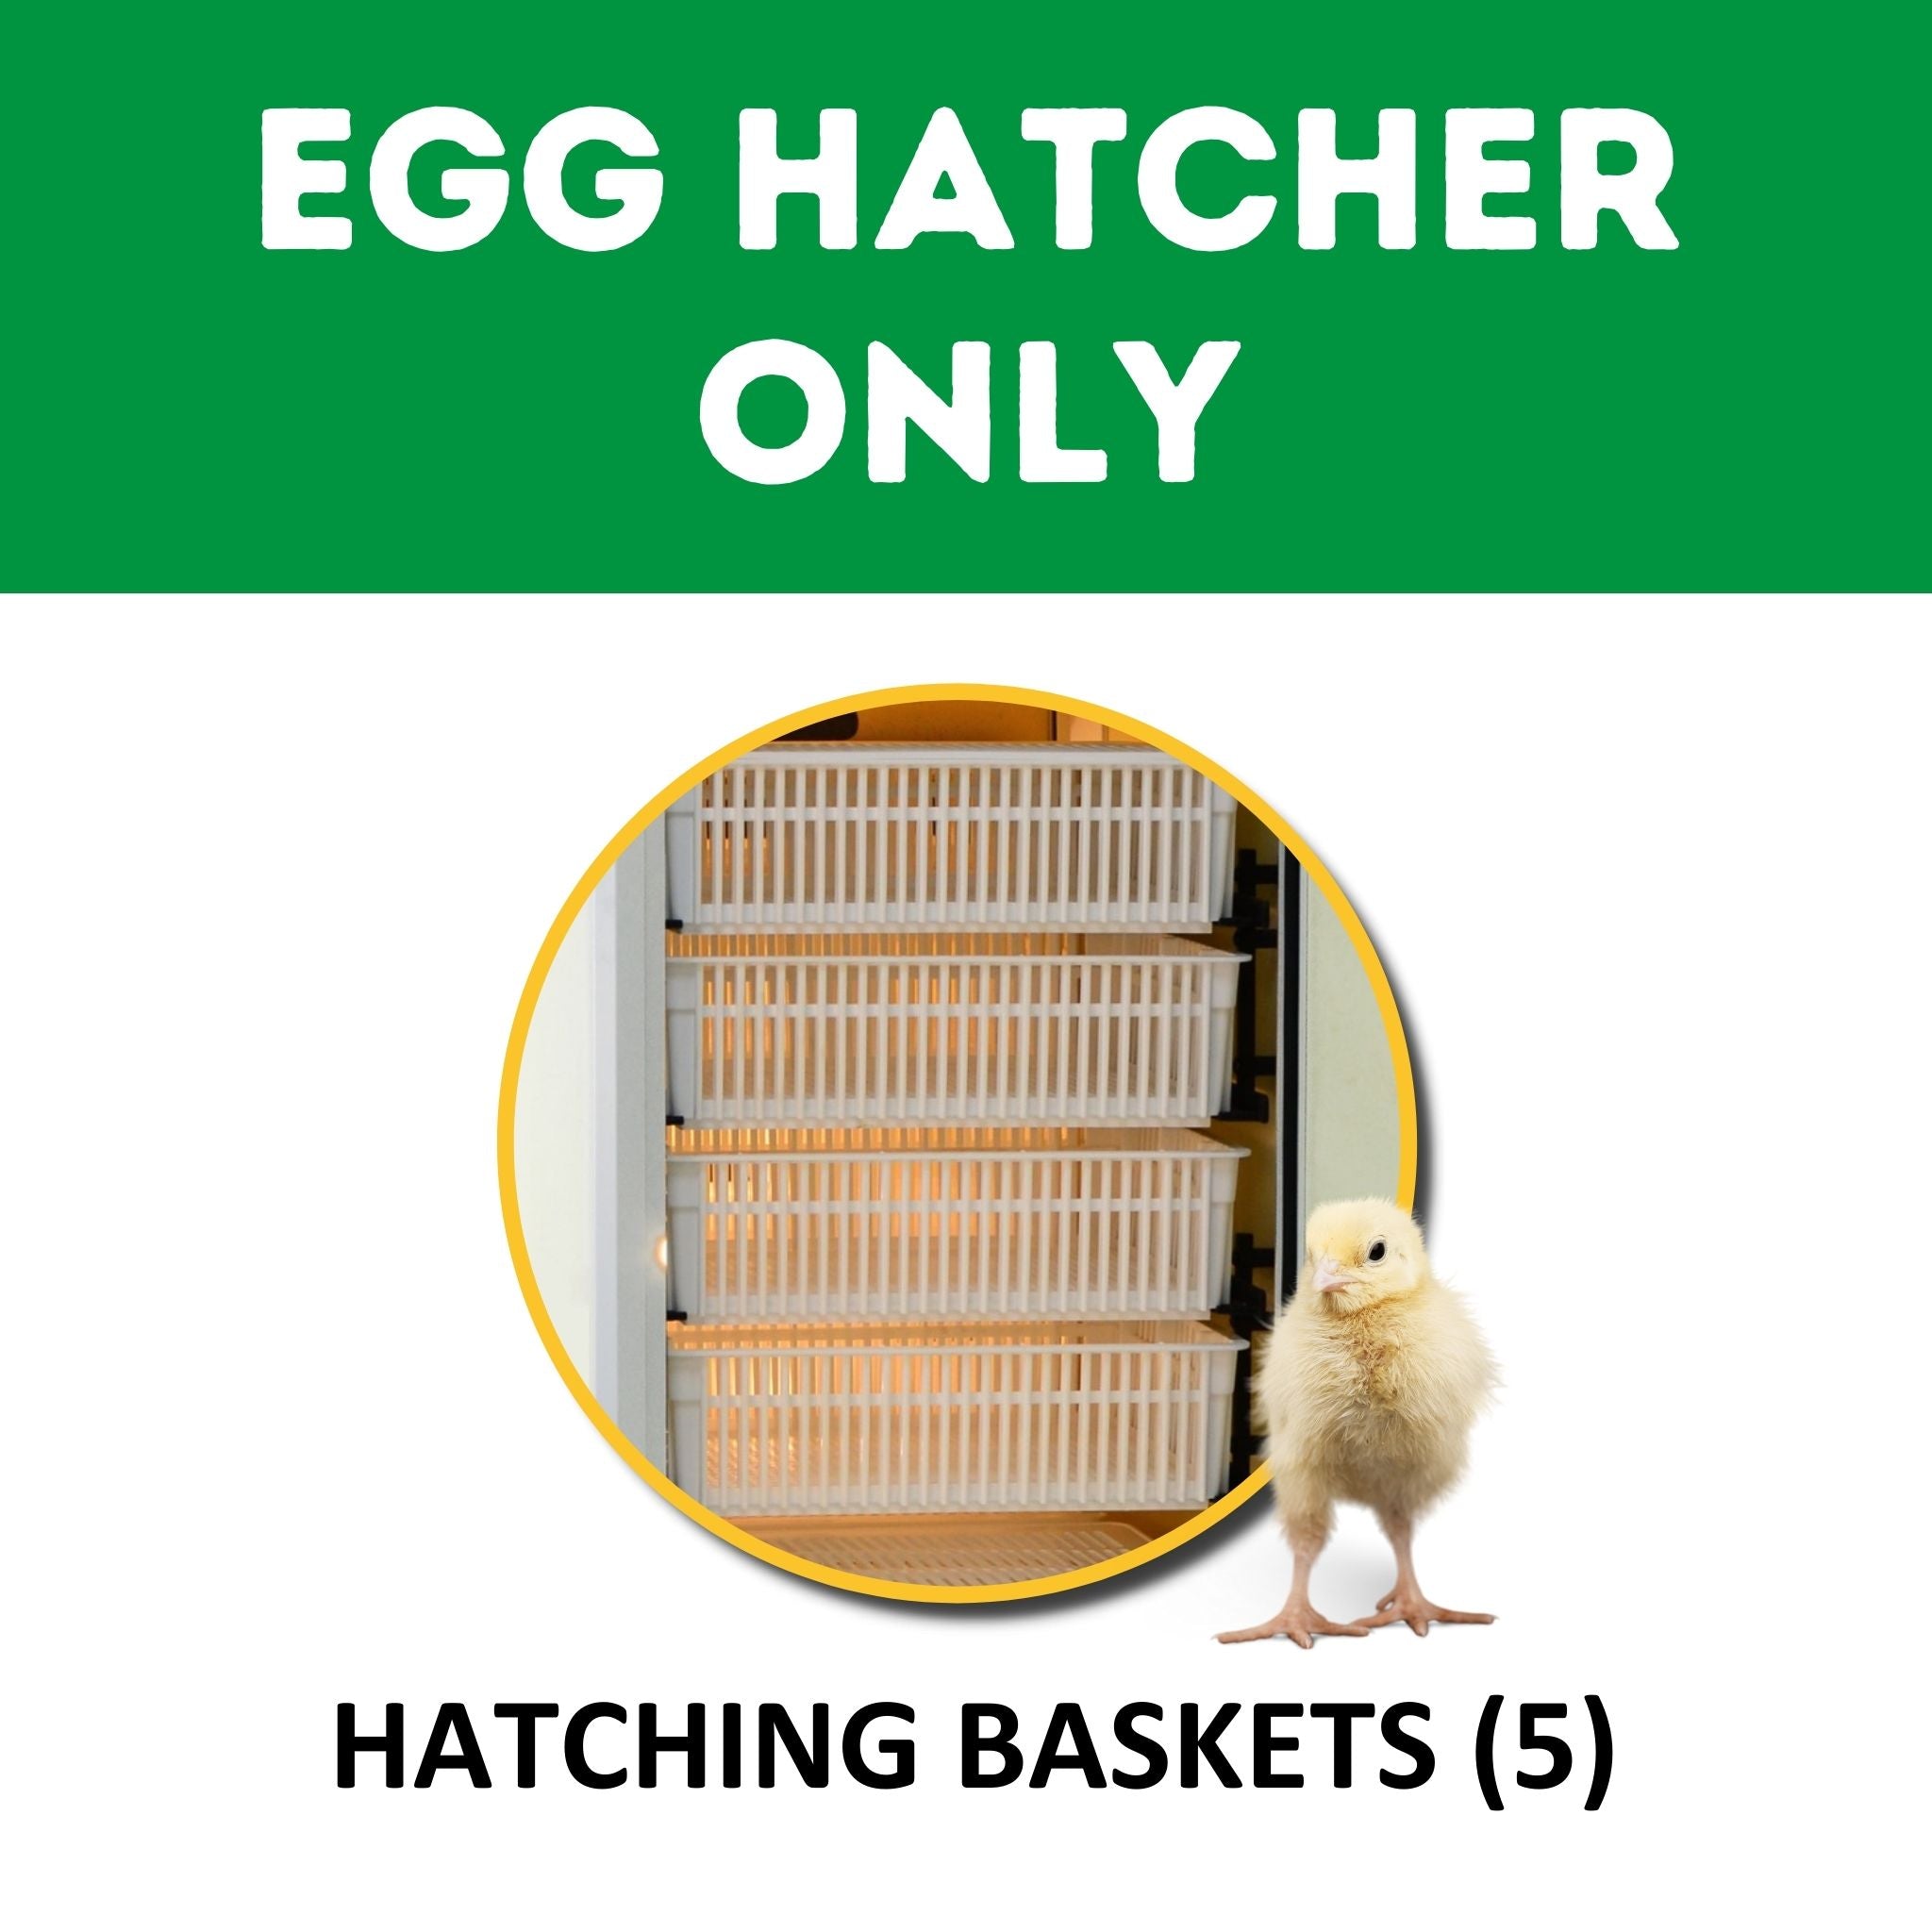 Hatching Time image shows that this unit is an Egg Hatcher Only. Image shows chick on front.